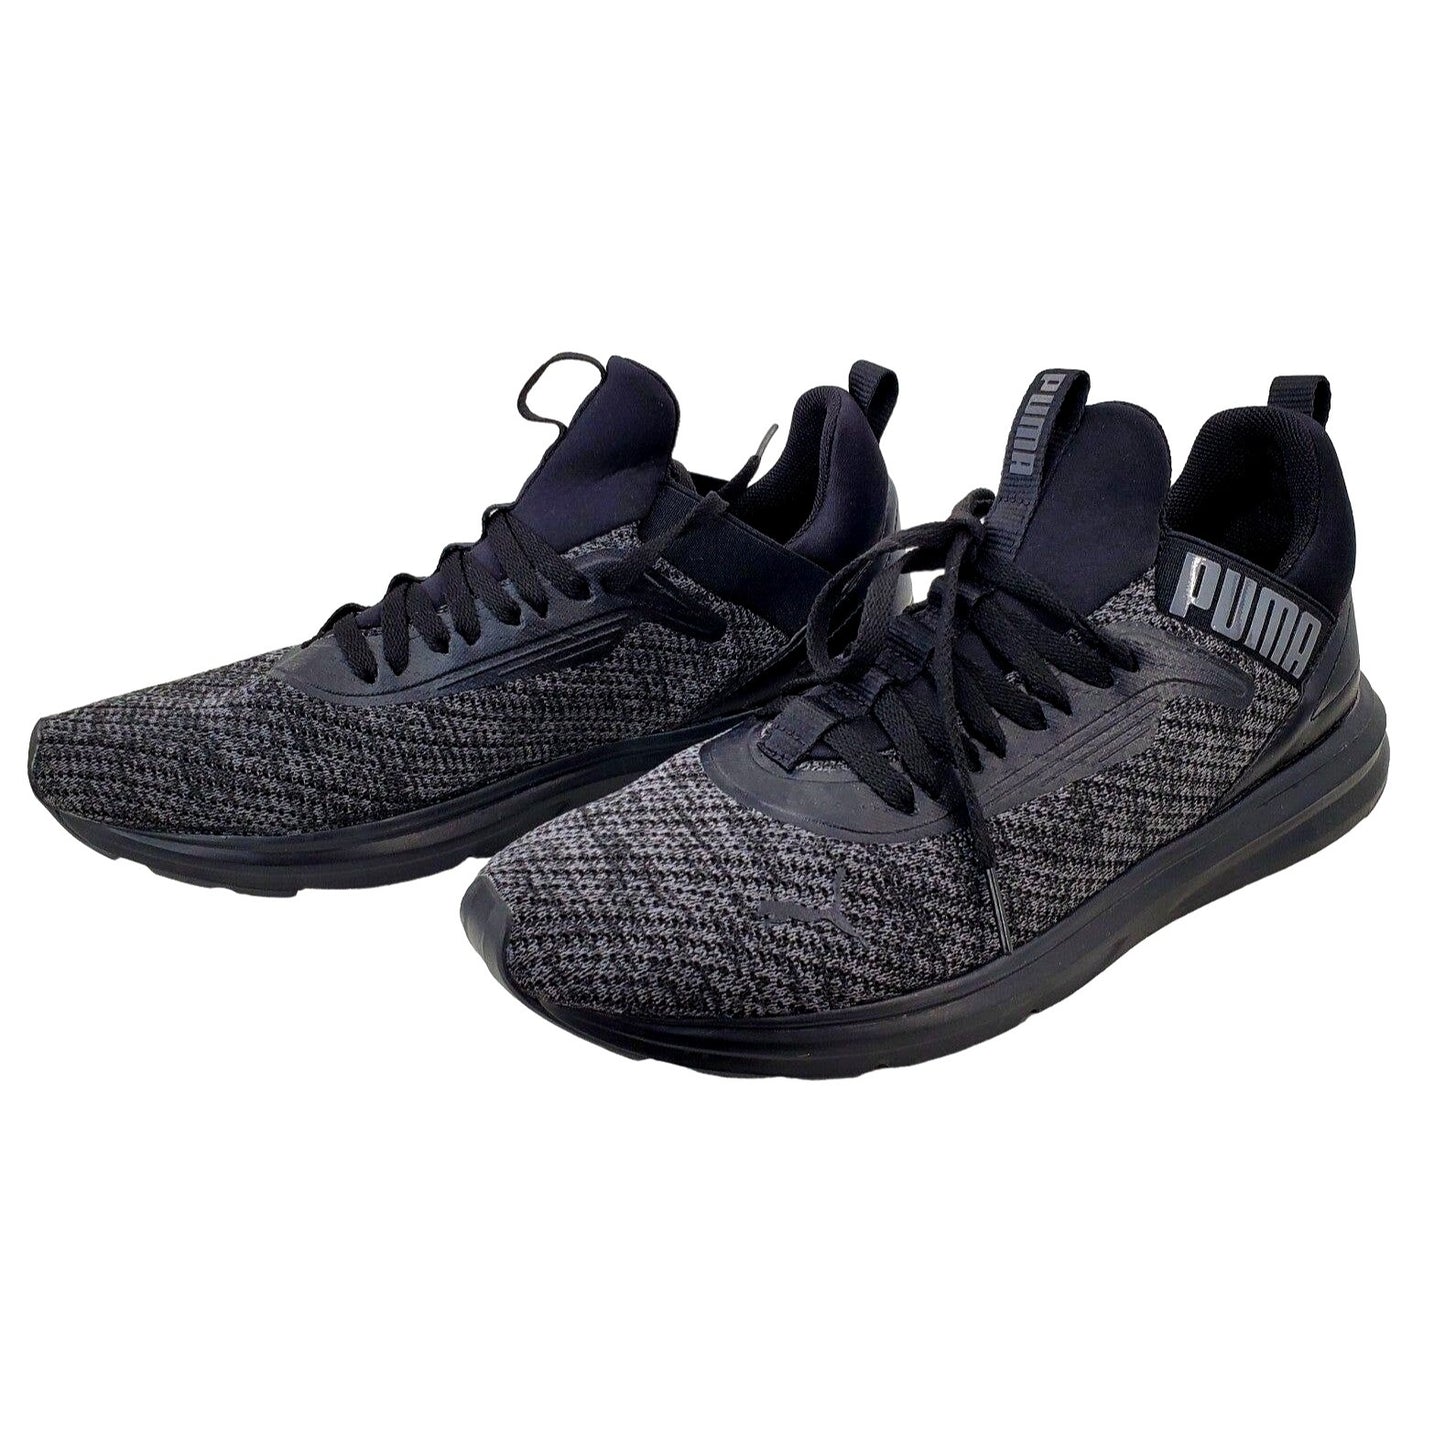 PUMA Sneakers Men's Enzo Beta Woven V3 Running Activewear Slip-on shoes